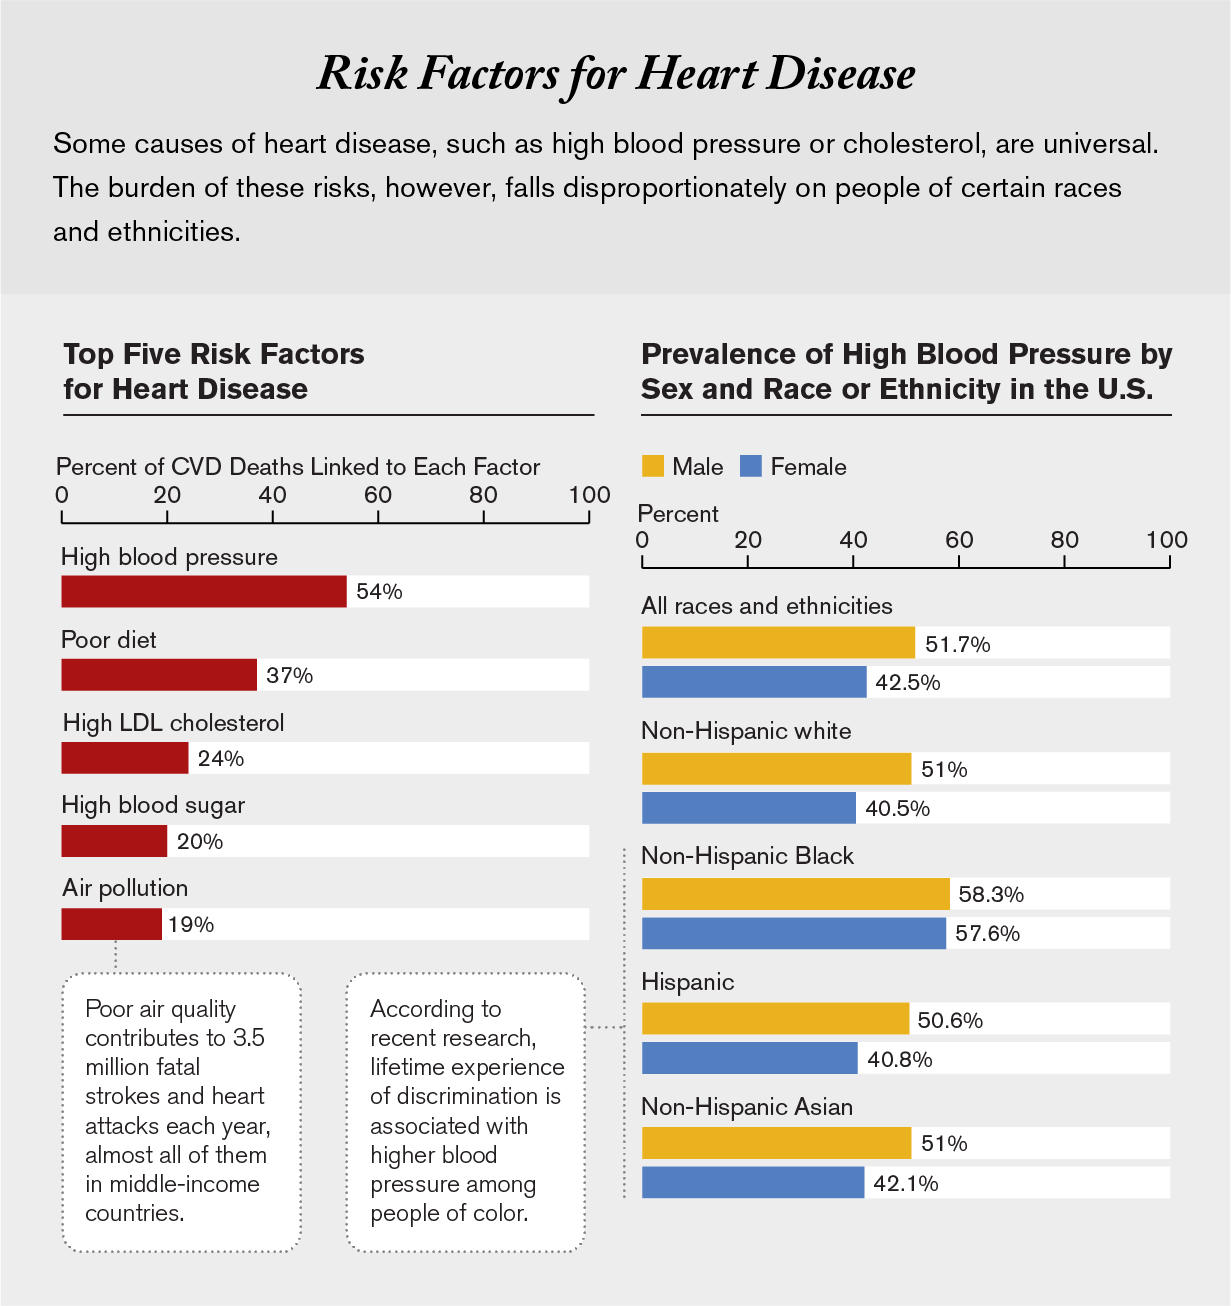 Charts show percent of heart disease deaths linked to each top risk factor and U.S. hypertension prevalence by sex and race.